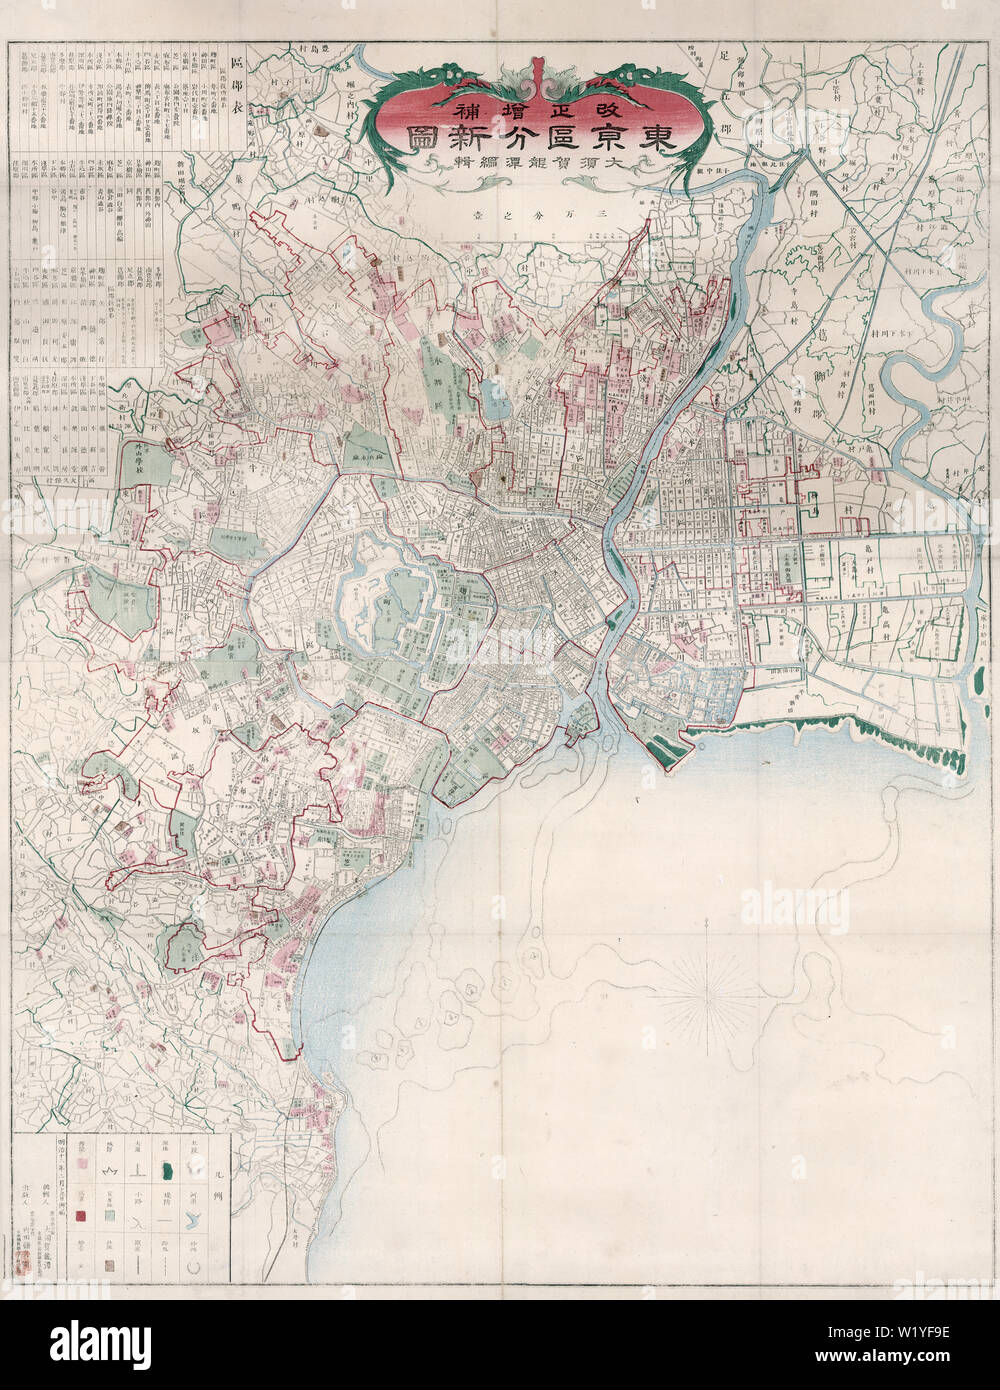 [ 1870s Japan - Vintage Map of Tokyo ] —   Map of Tokyo, printed on February 19, 1879 (Meiji 12). Features railway stations and the names of machi.  19th century vintage map. Stock Photo